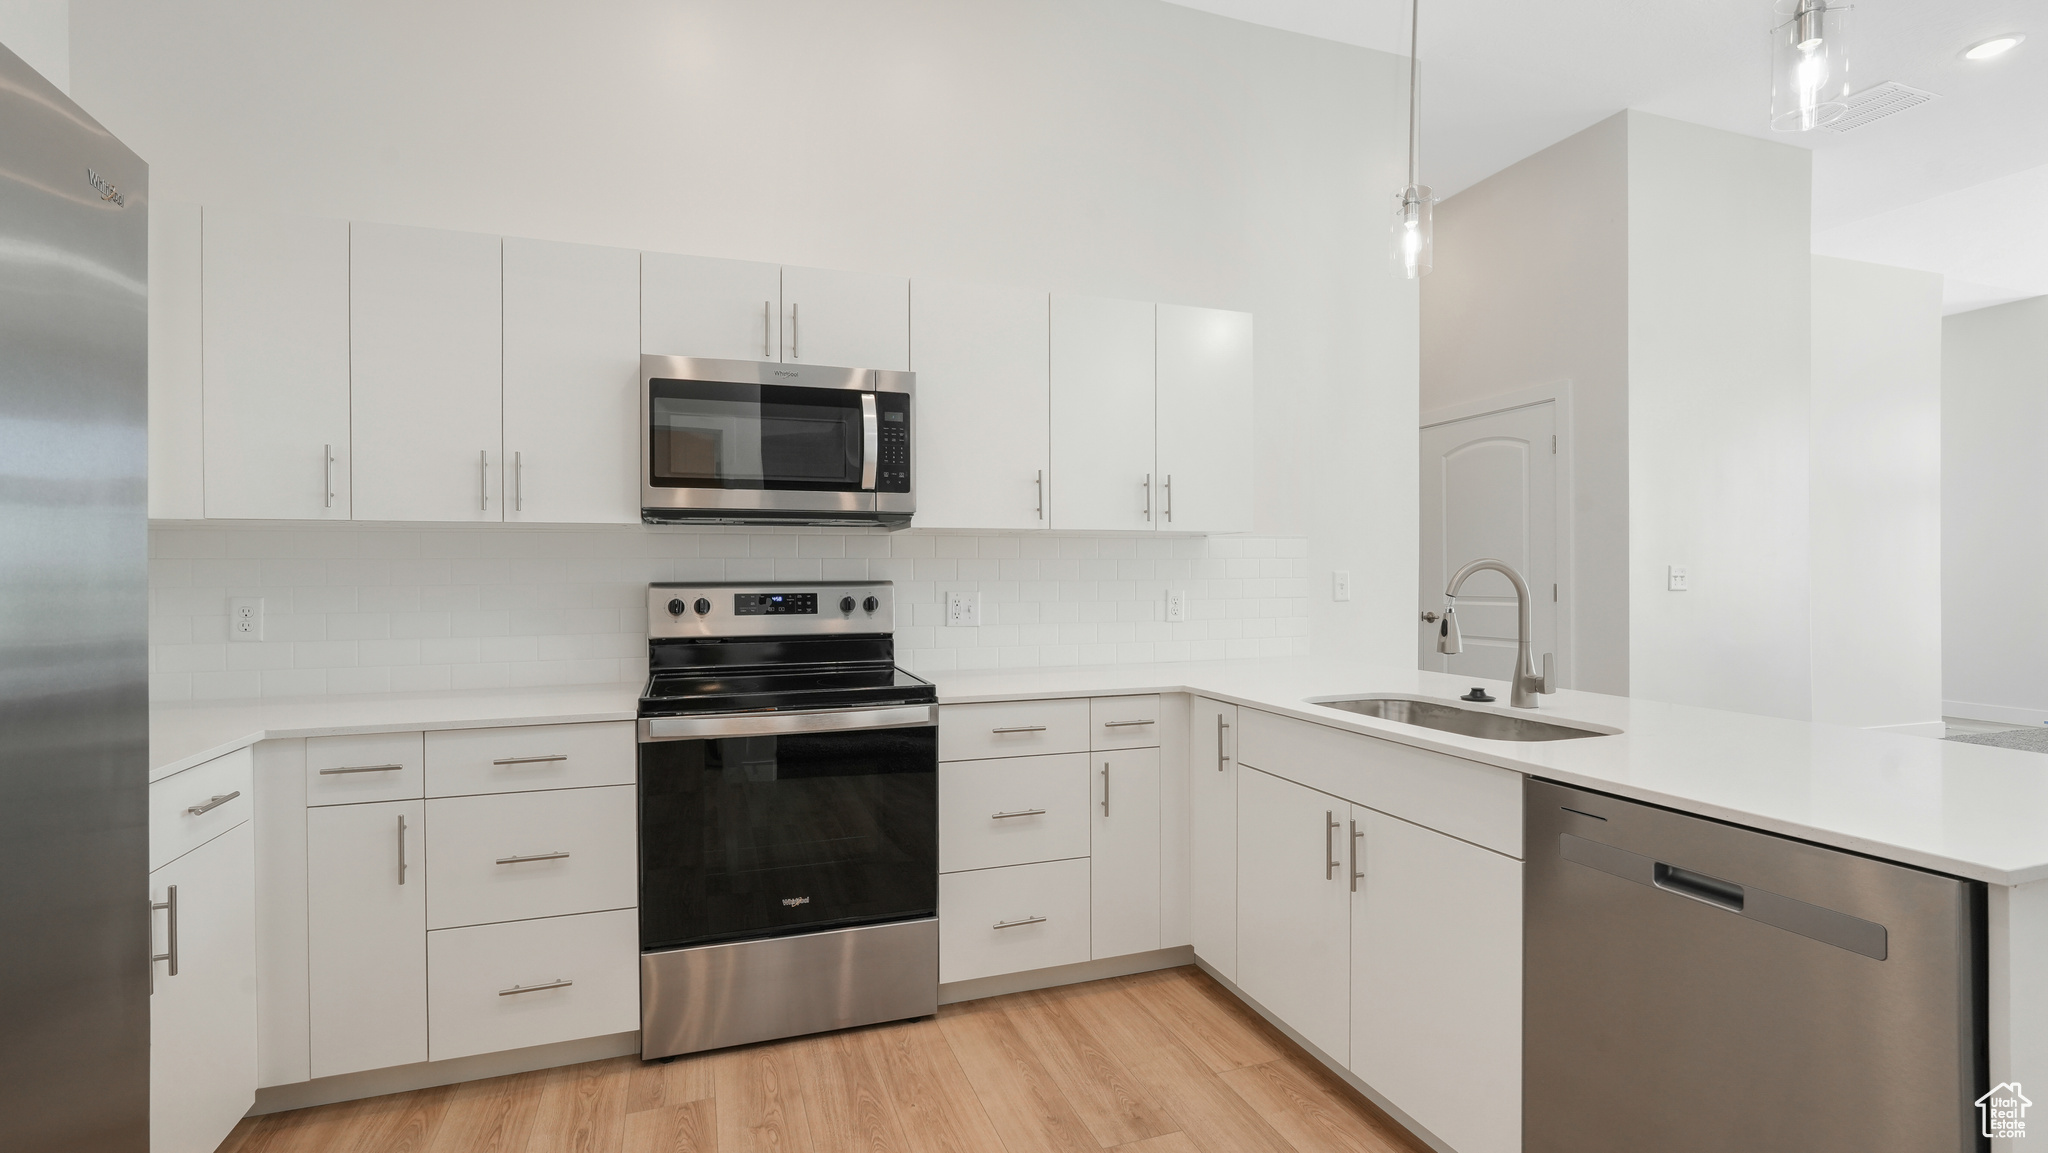 Bright modern kitchen with stainless steel appliances, quartz counters, and tile backsplash. Fridge Included!